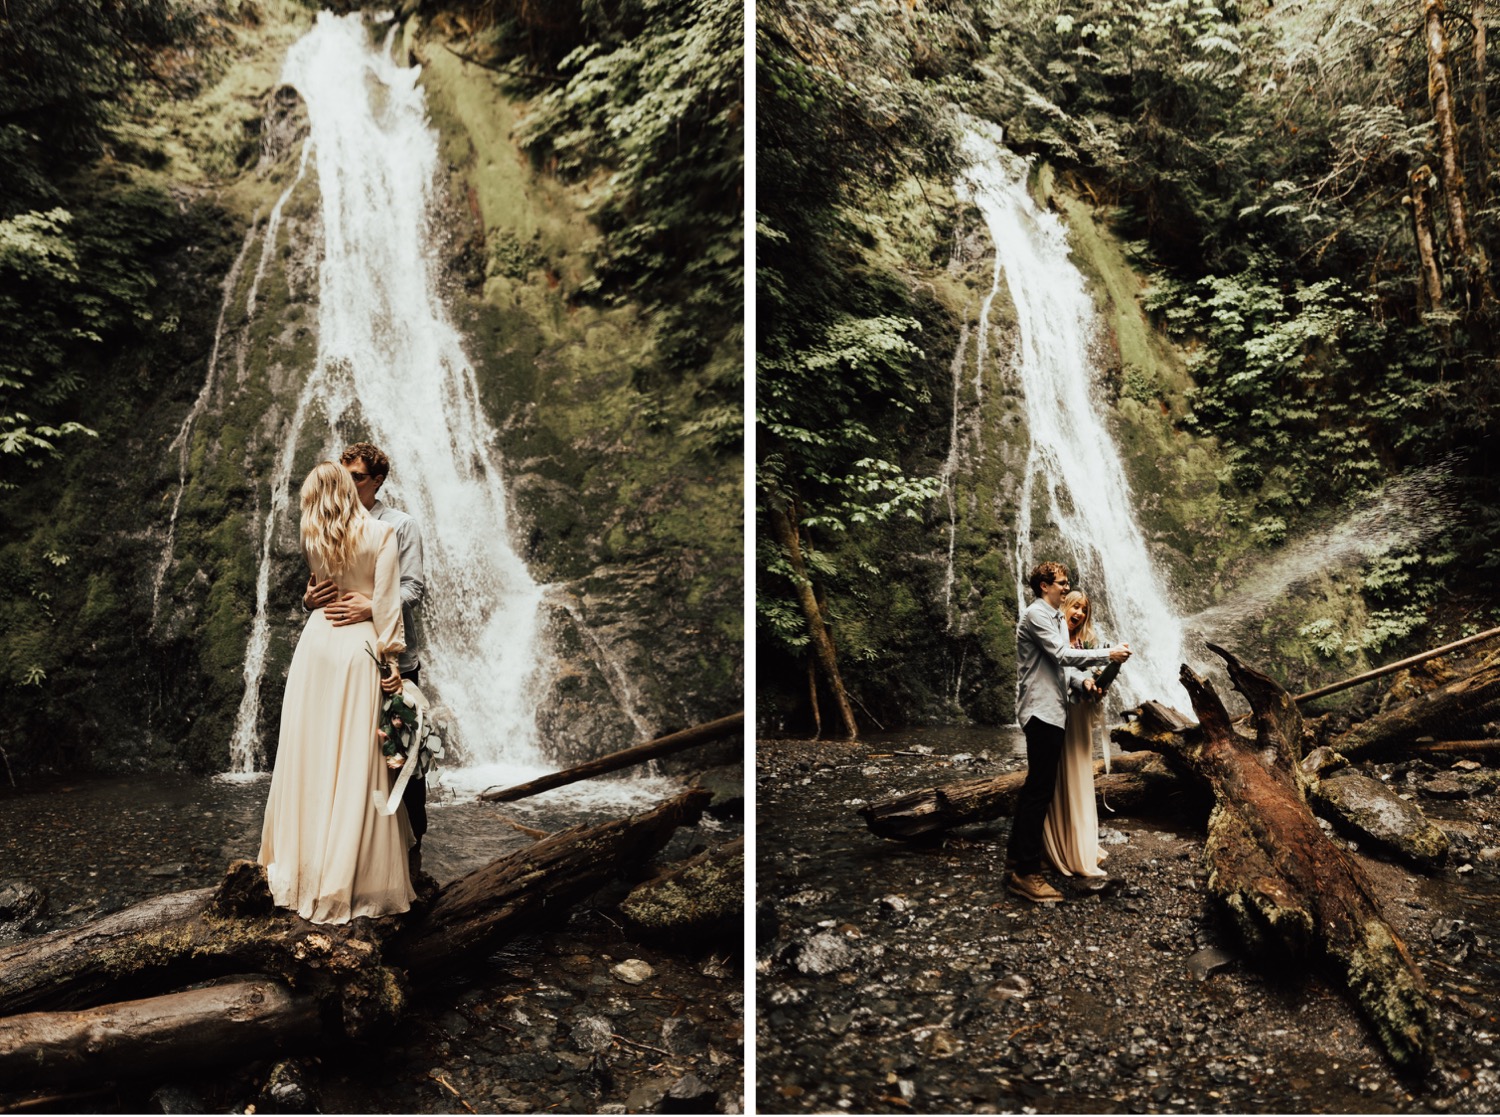 Olympic National Park Intimate Waterfall Elopement